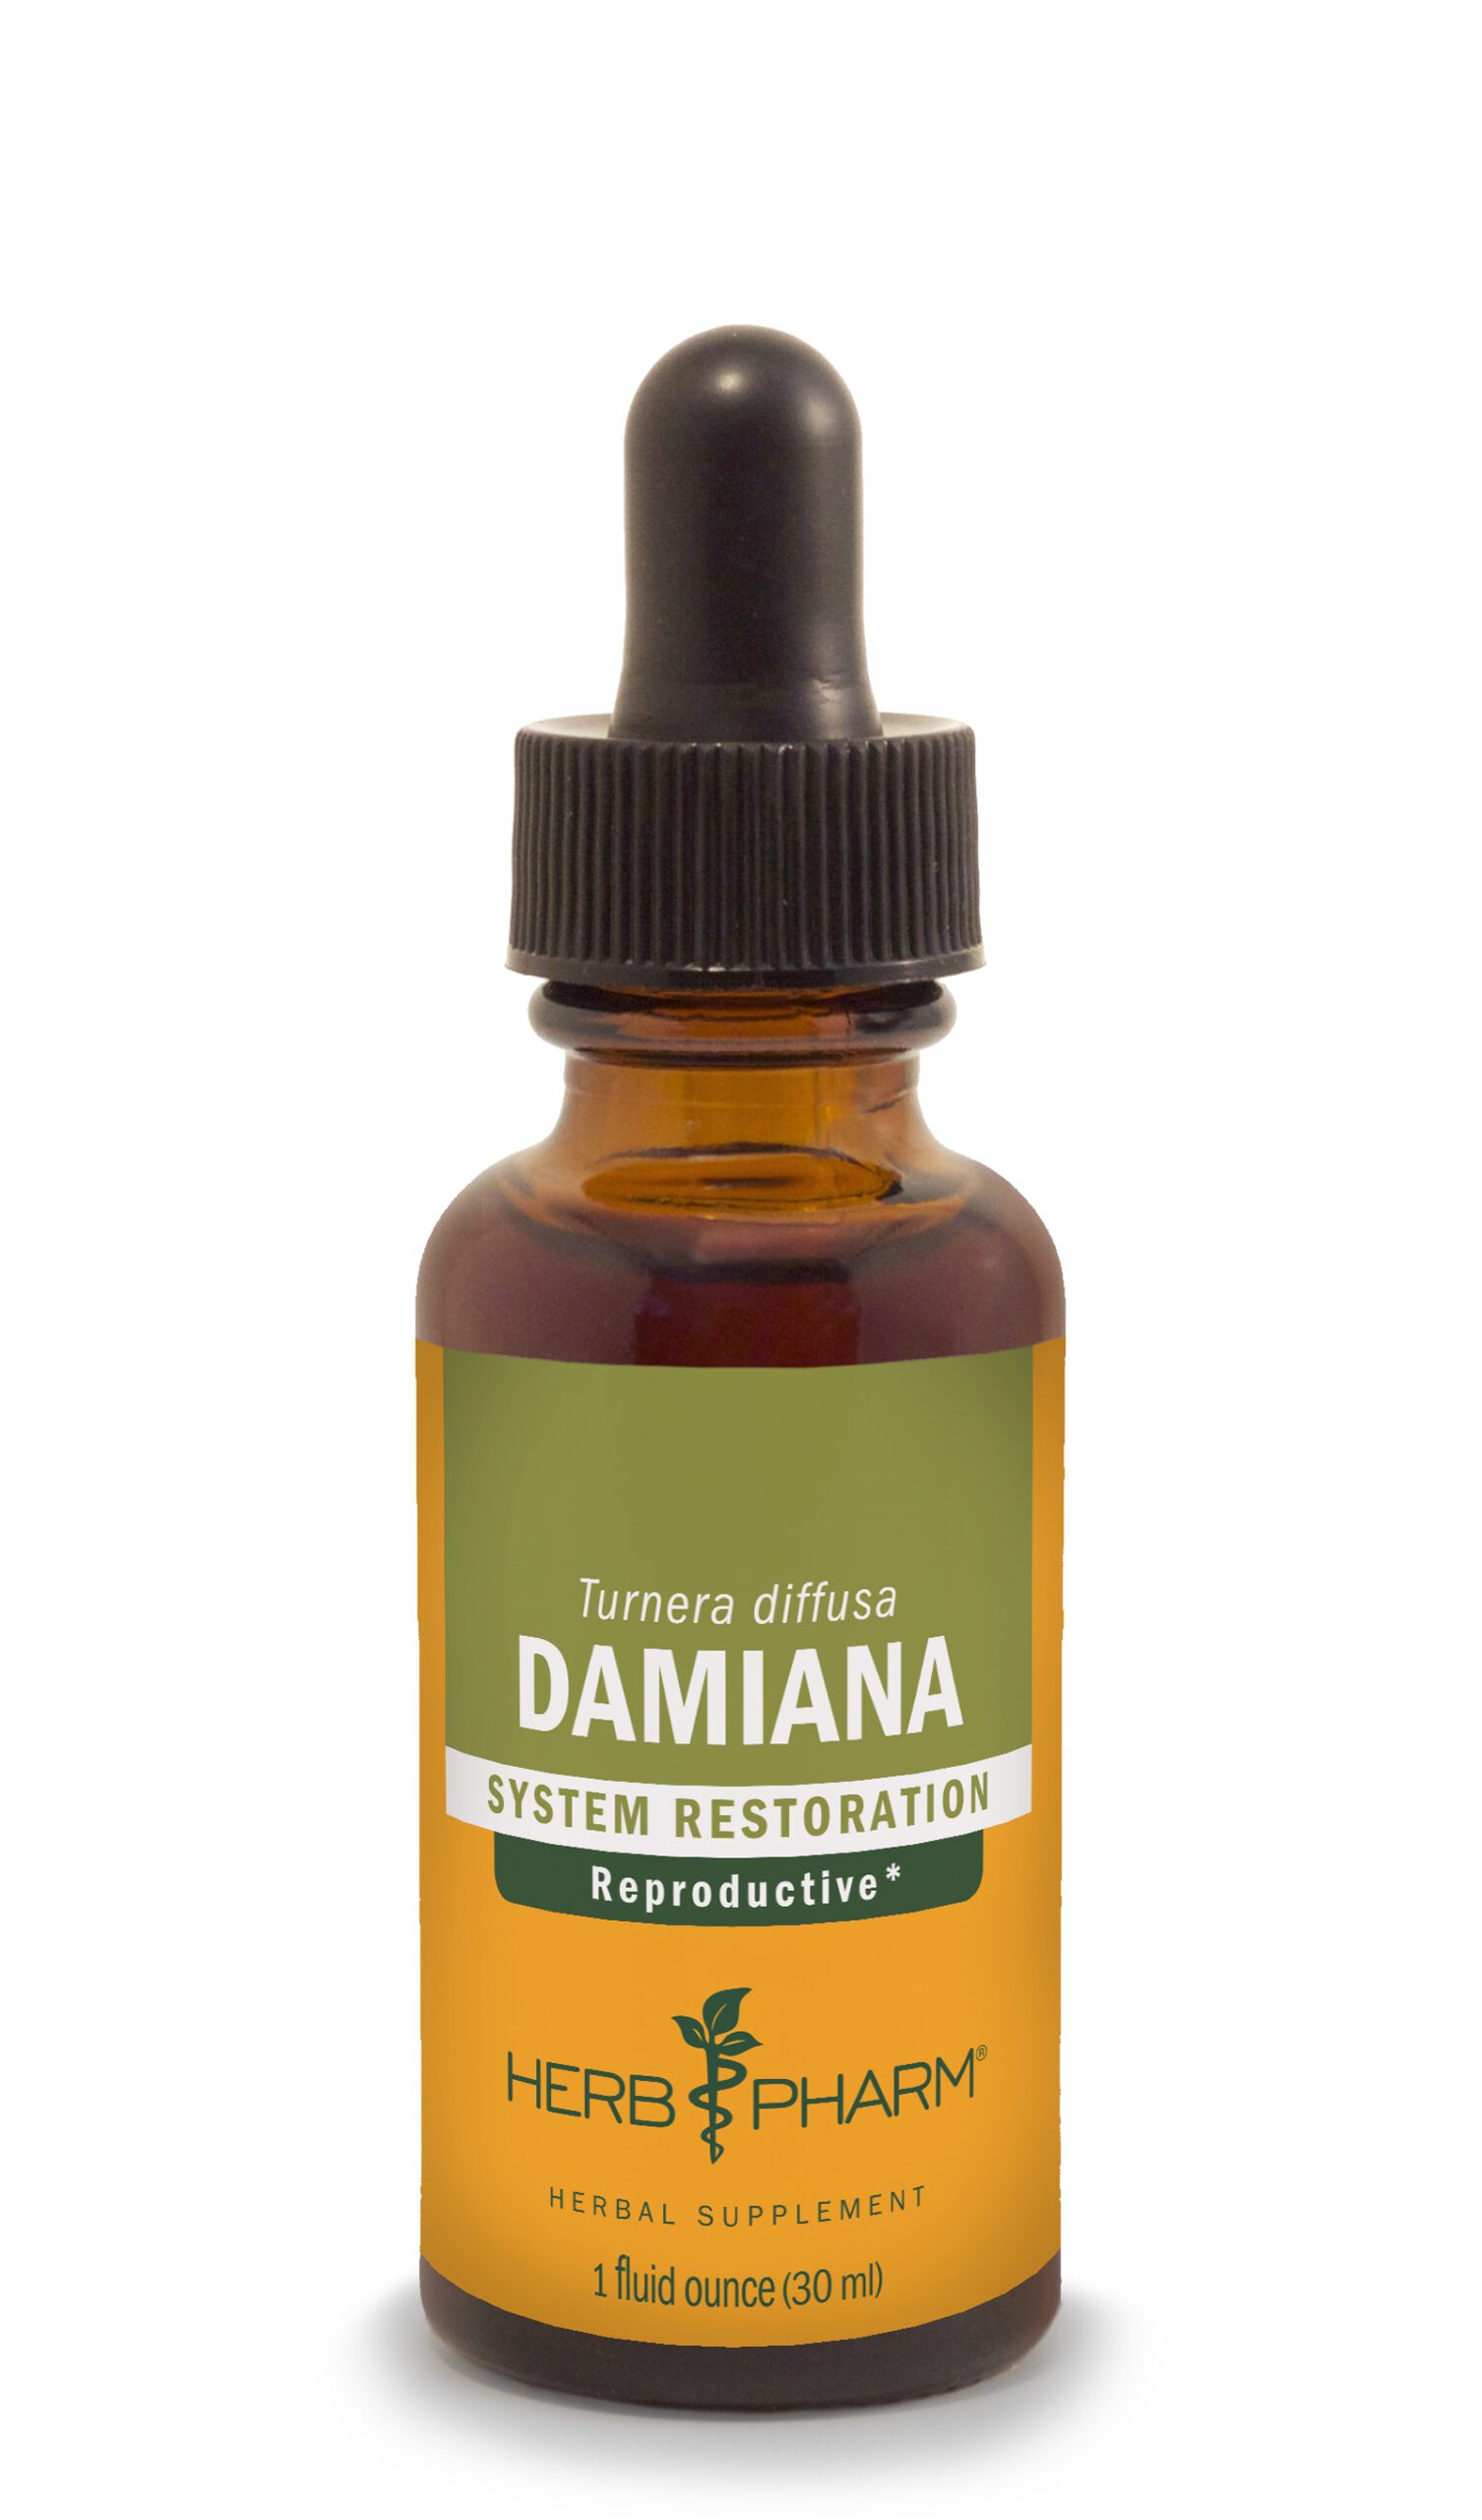 Product Listing Image for Herb Pharm Damiana Tincture 1oz